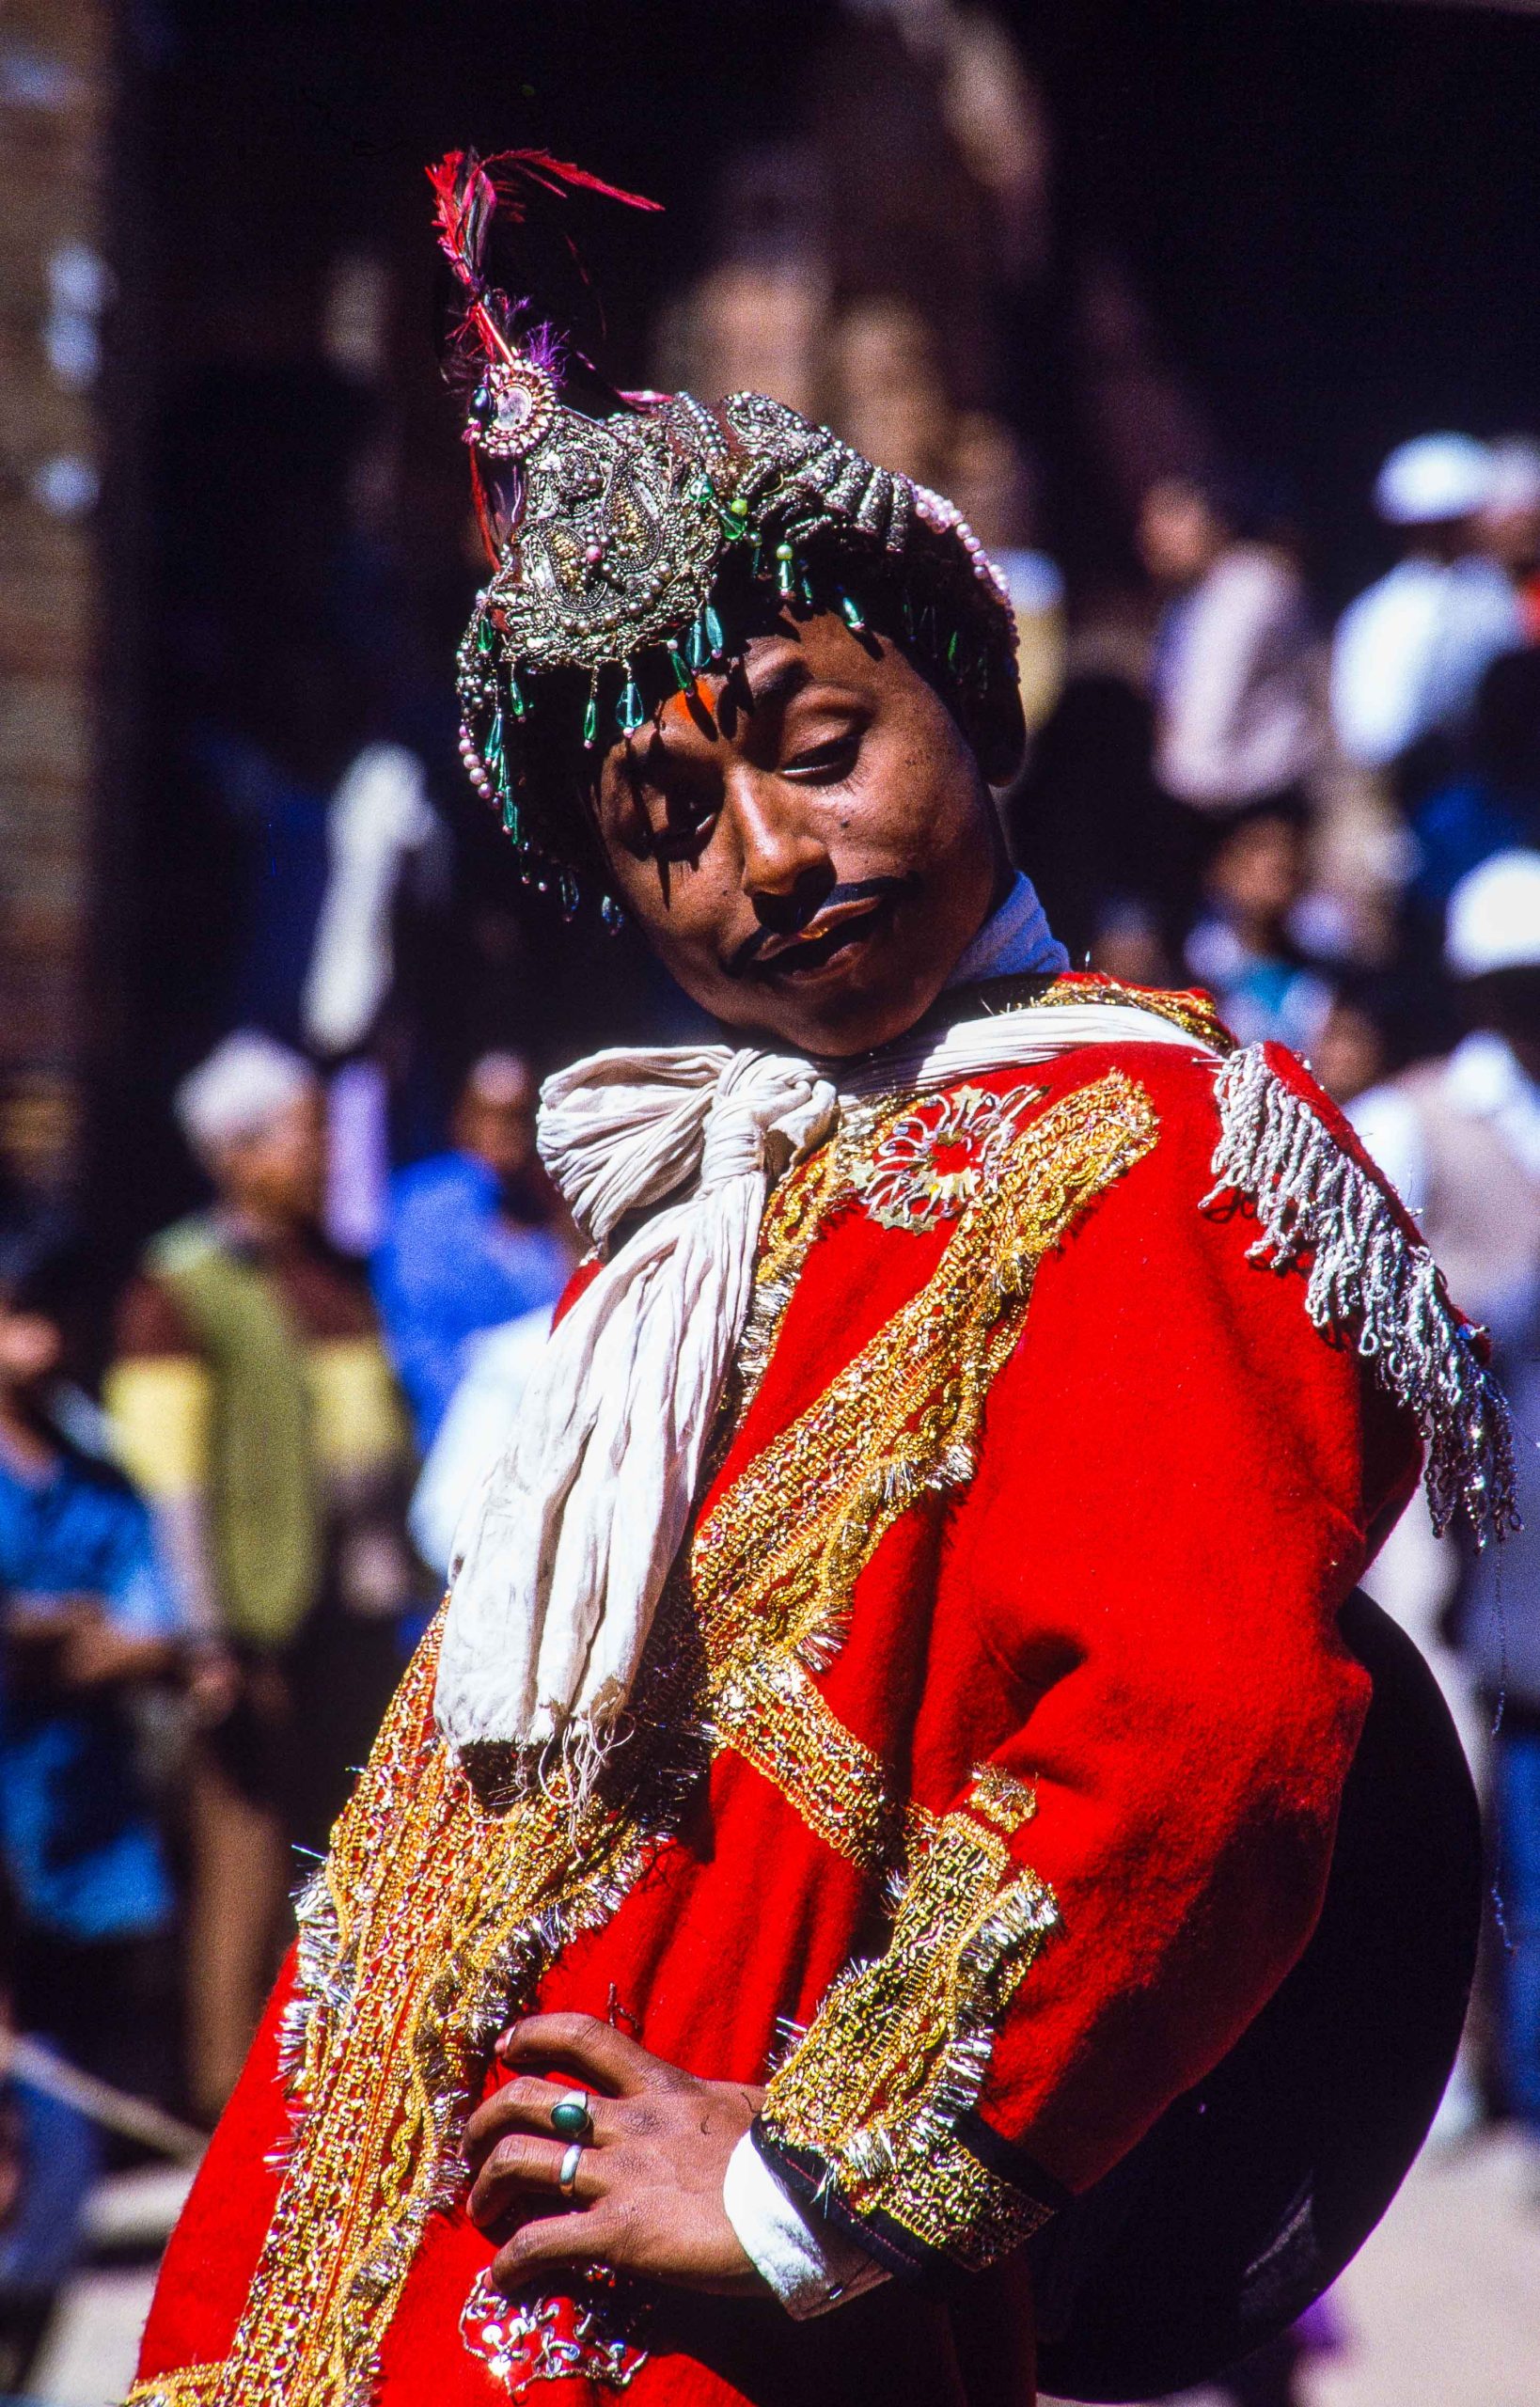 A man enjoying his character in a stage play in Bhaktapur Festival1997 image